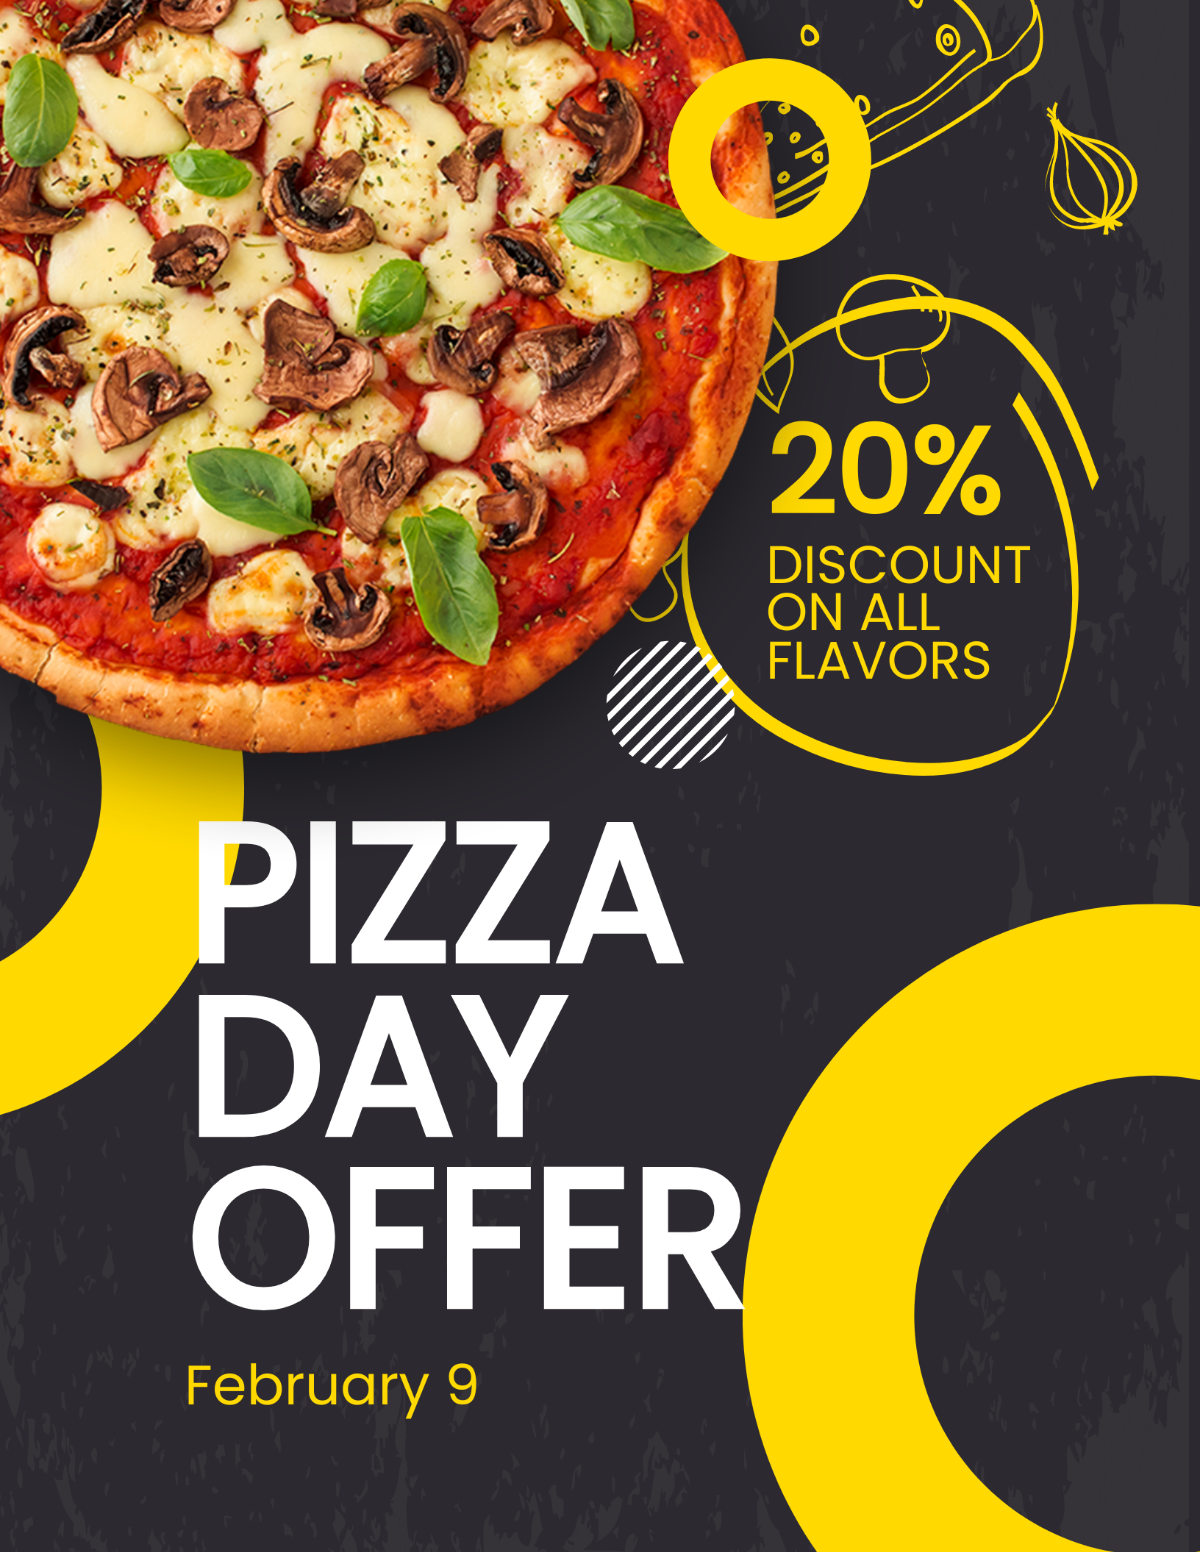 Pizza Day Offer Flyer Template